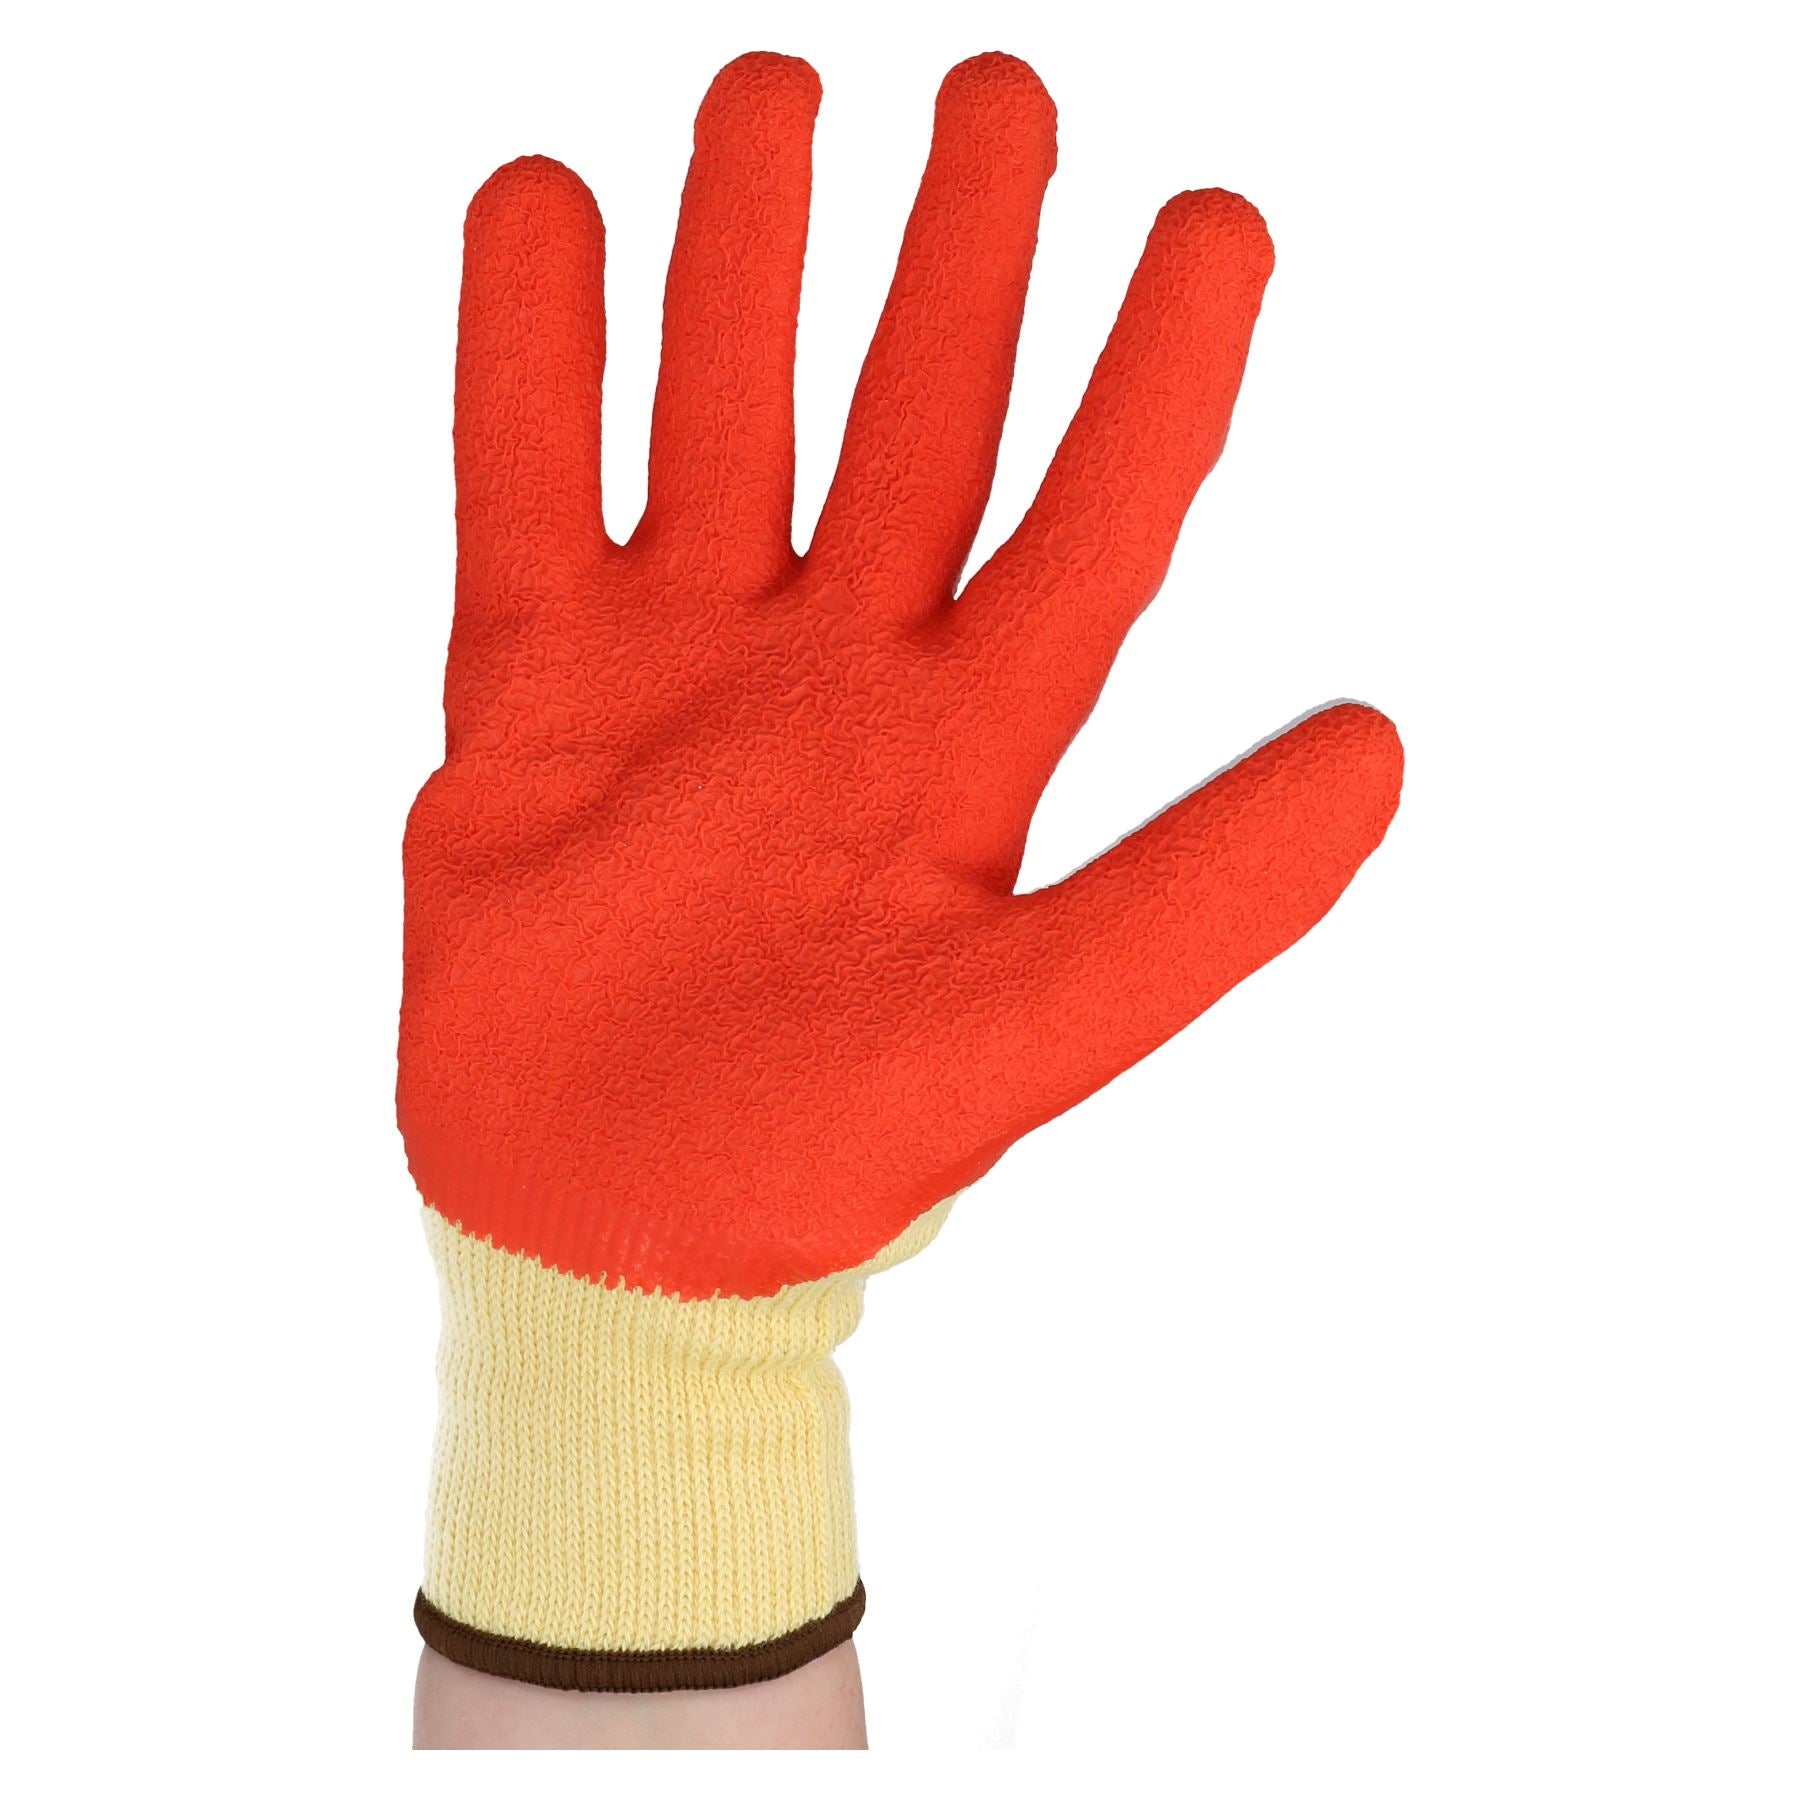 9" Builders Protective Gardening DIY Latex Rubber Coated Work Gloves